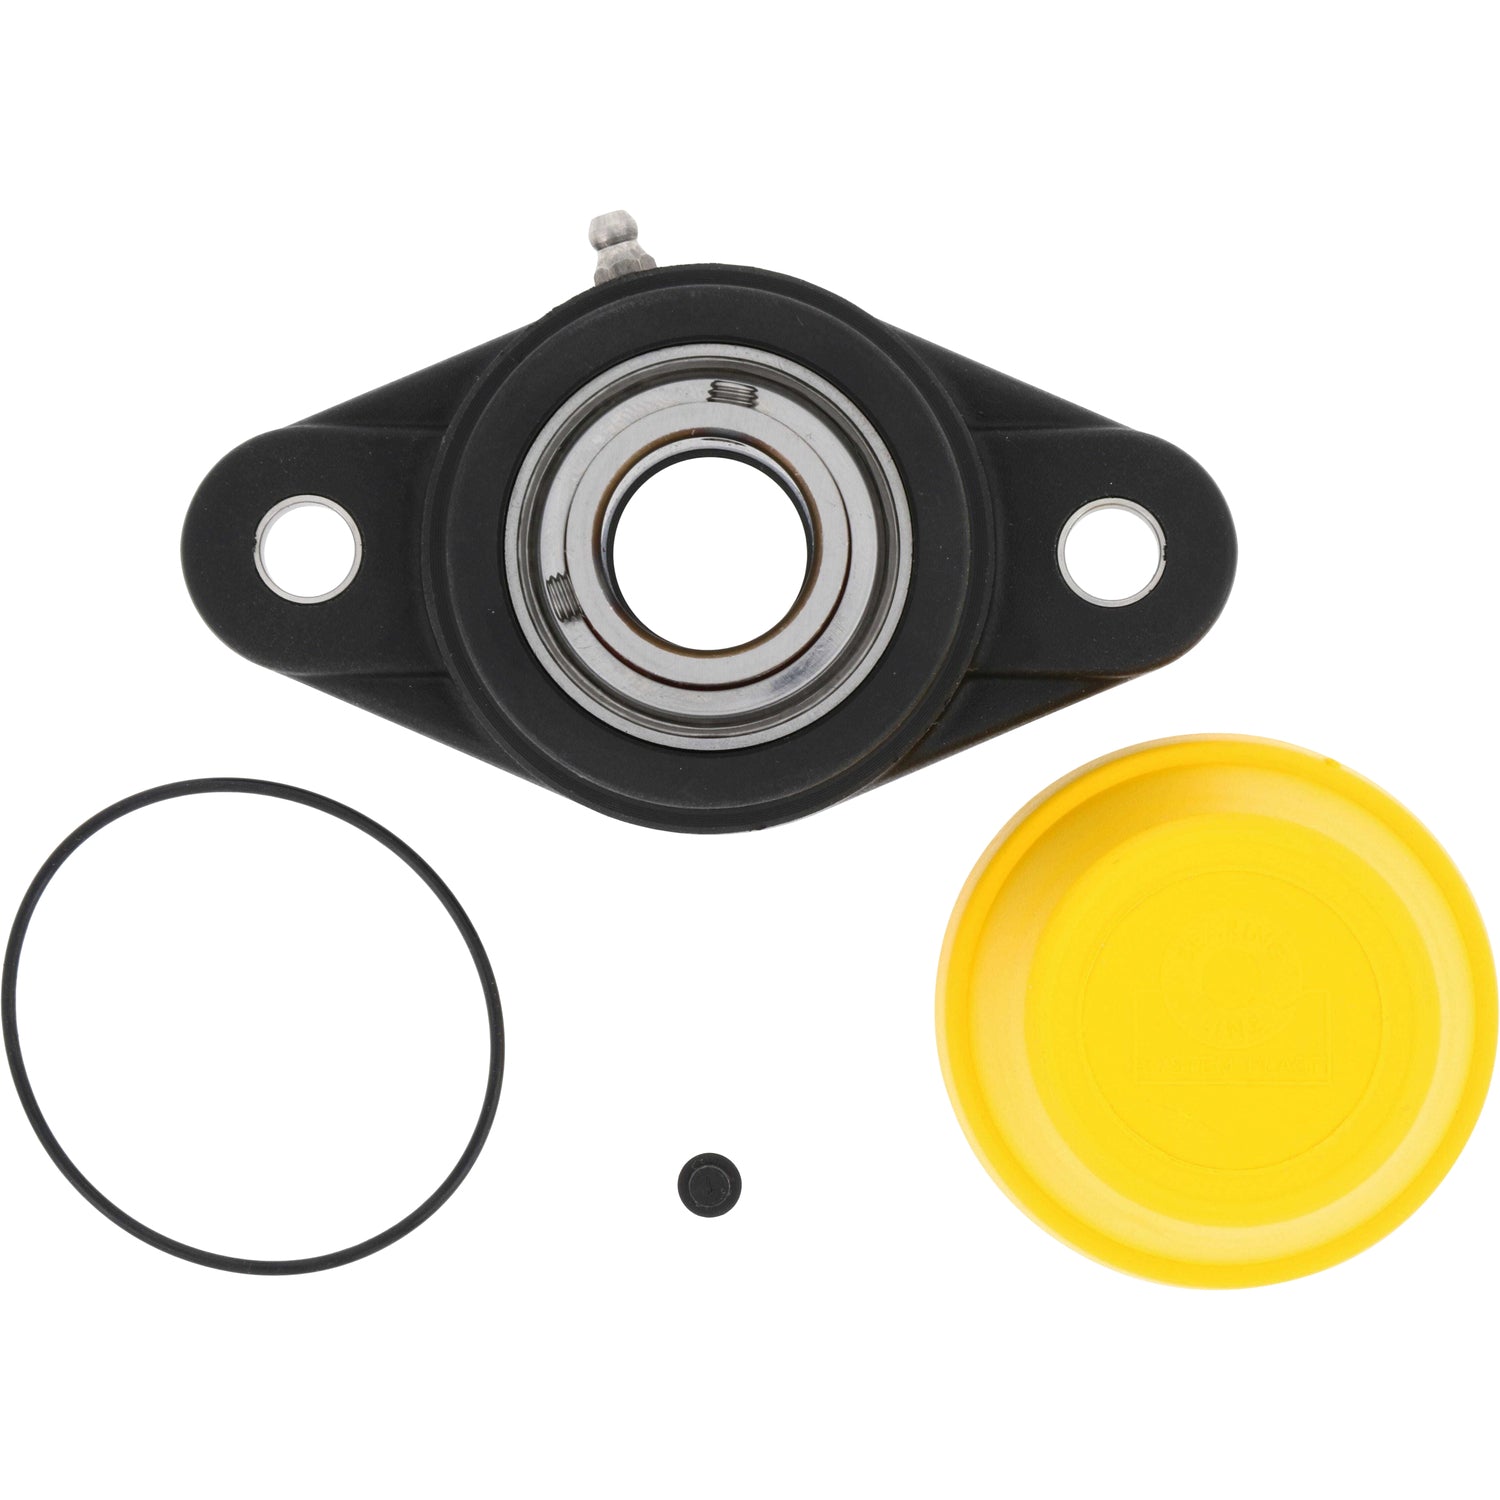 Black pillow block with exposed internal bearing,  stainless steel grease zerk and solid yellow cap and black rubber o-ring on white background.